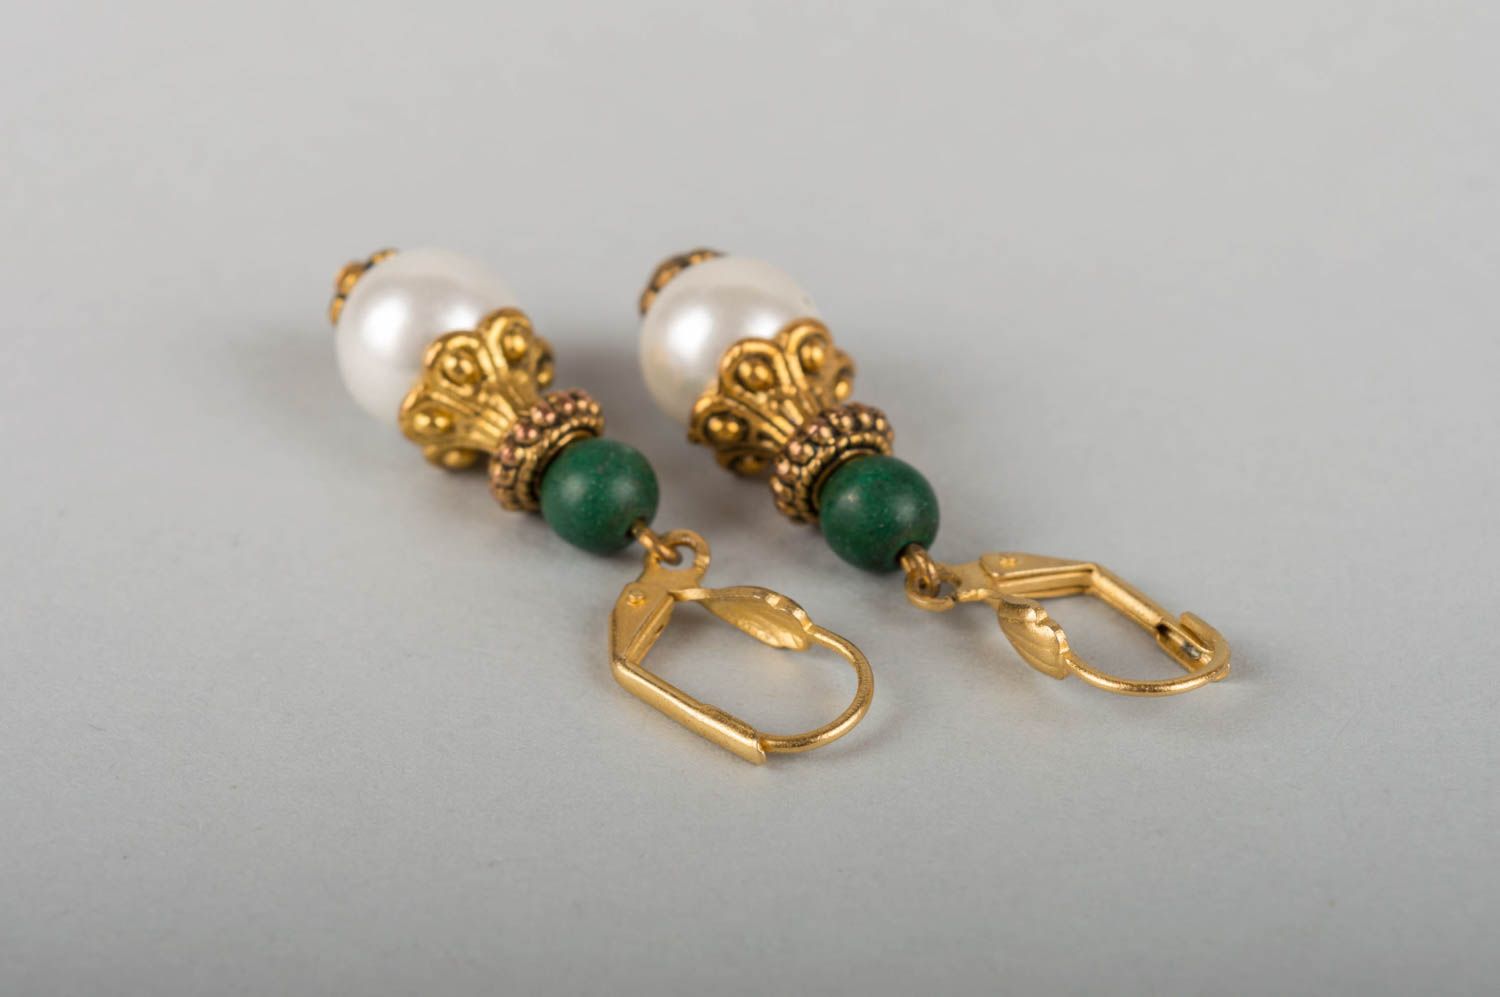 Brass earrings with agate and pearls handmade evening accessory for women photo 4